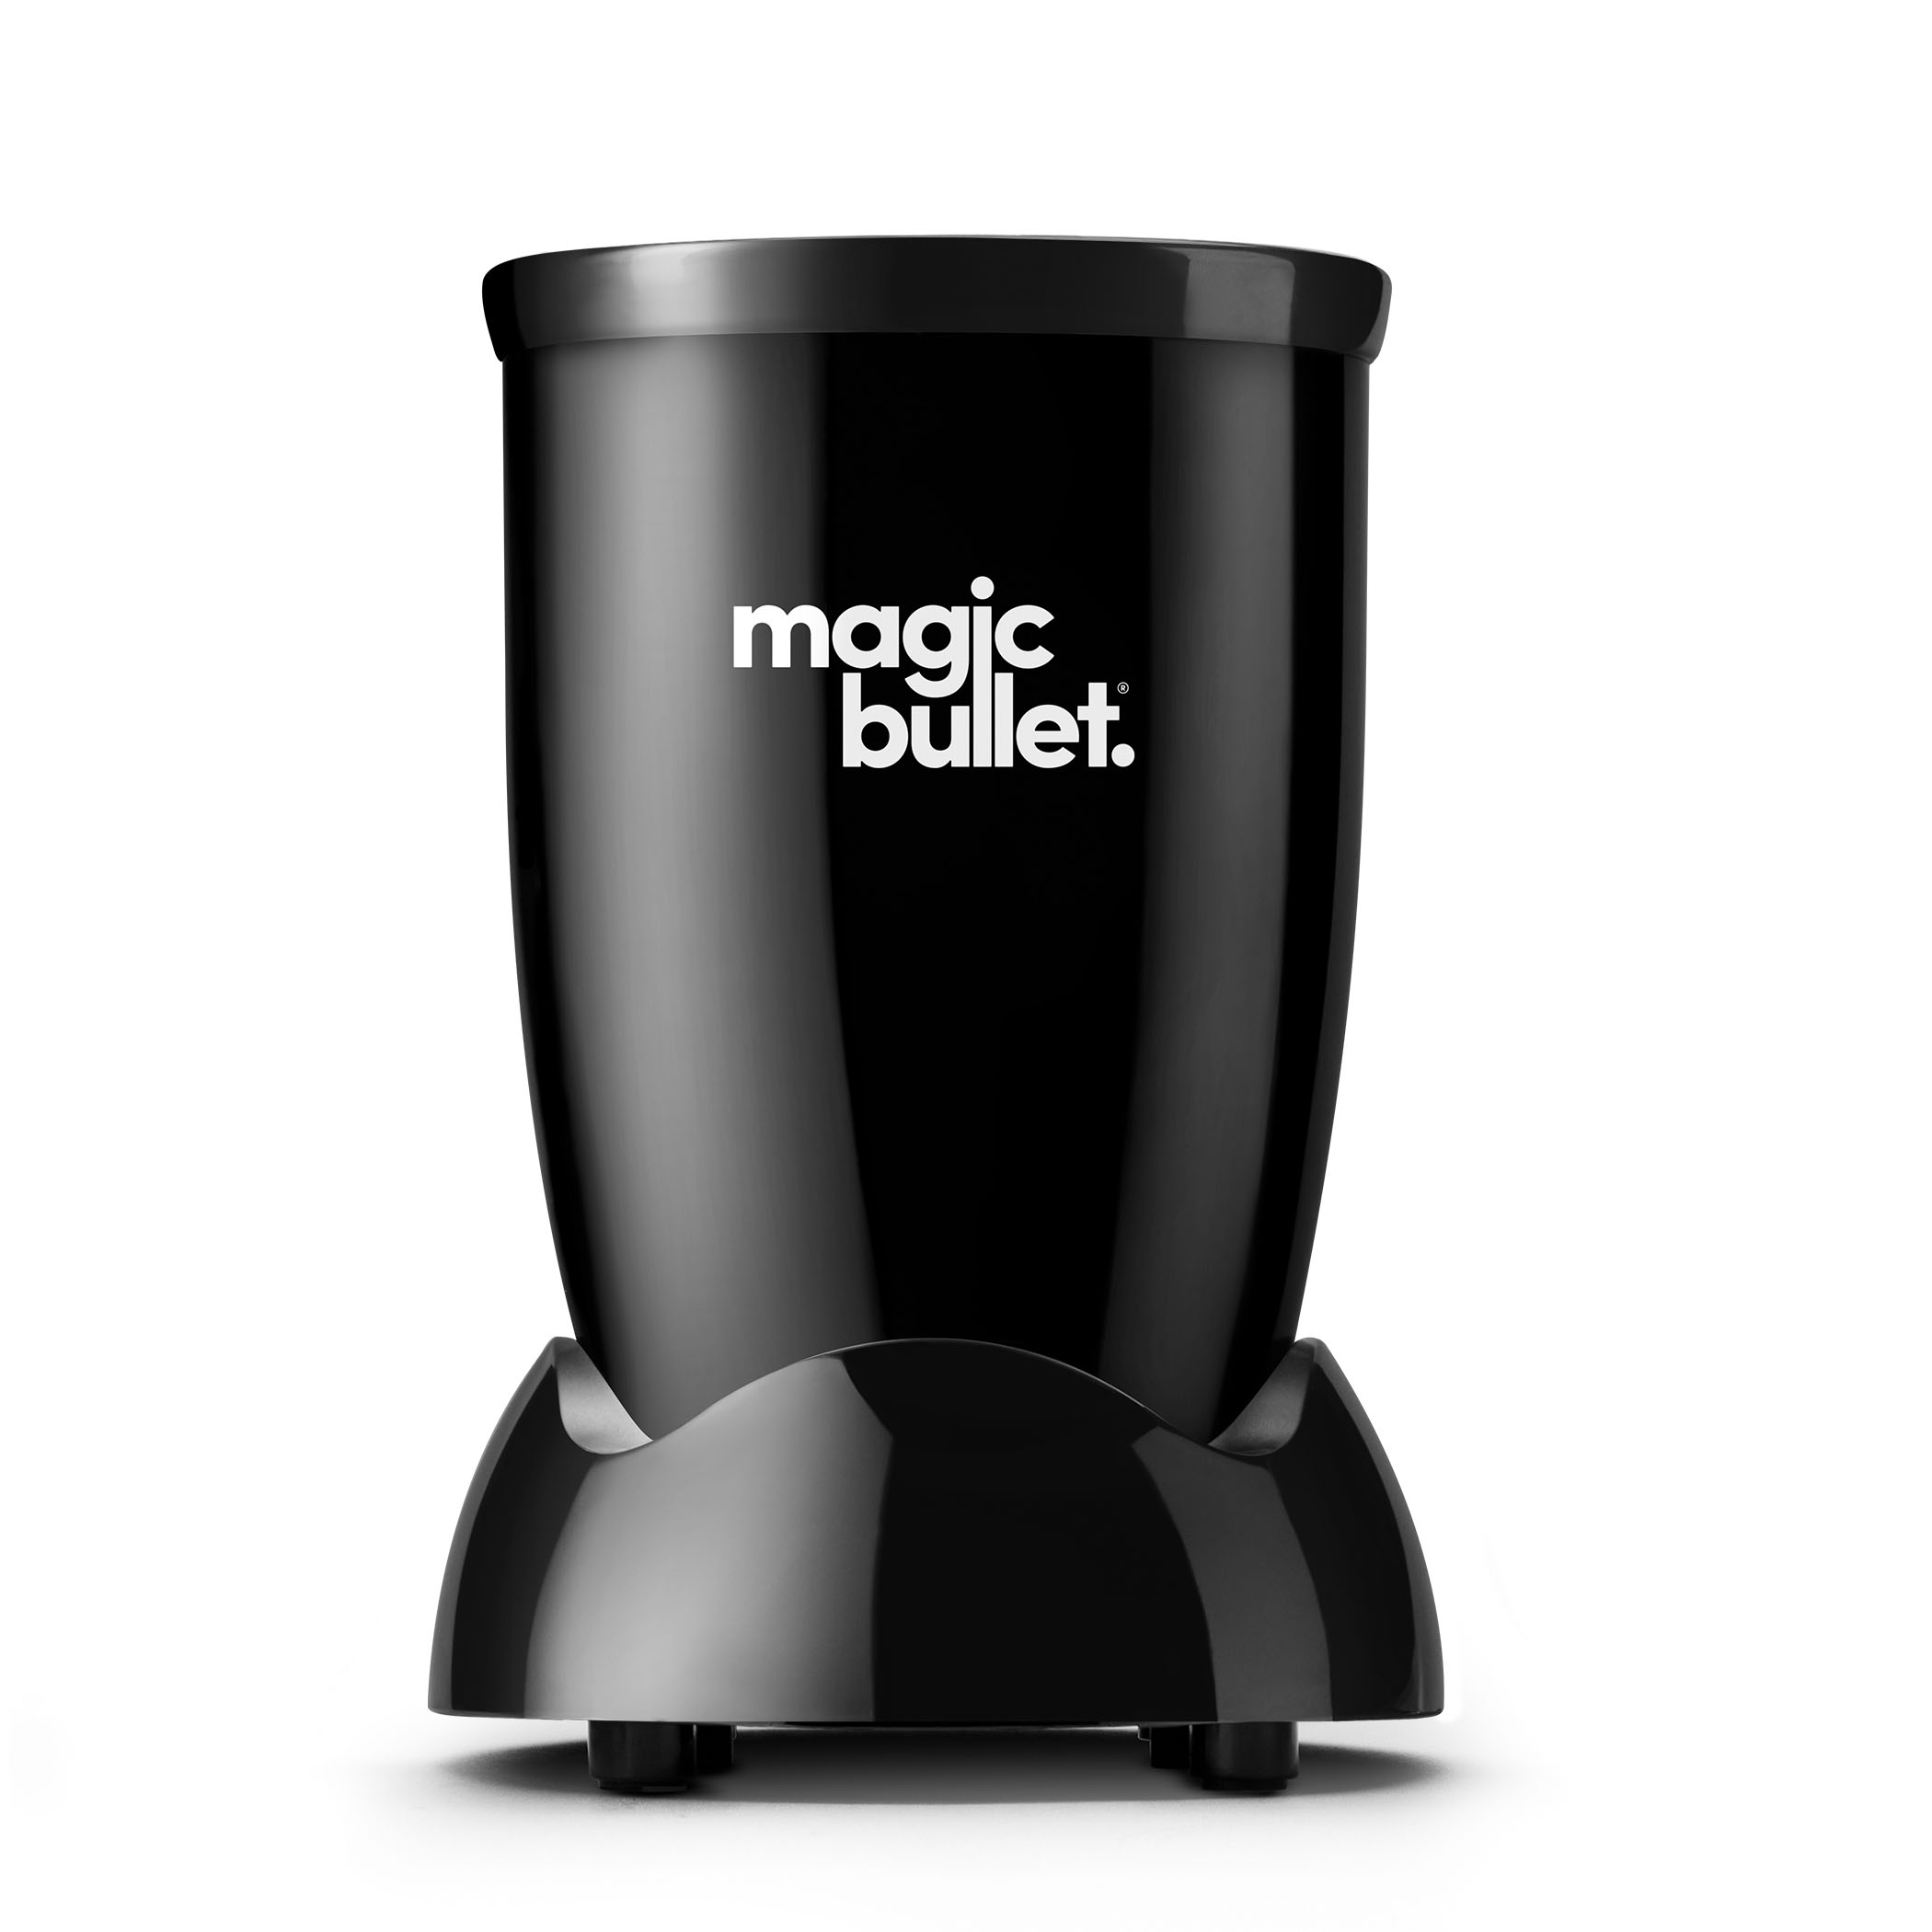 magic bullet 7-Piece 250 Watts Personal Blender 18 oz. MBR-0701AK, All Black - image 3 of 9